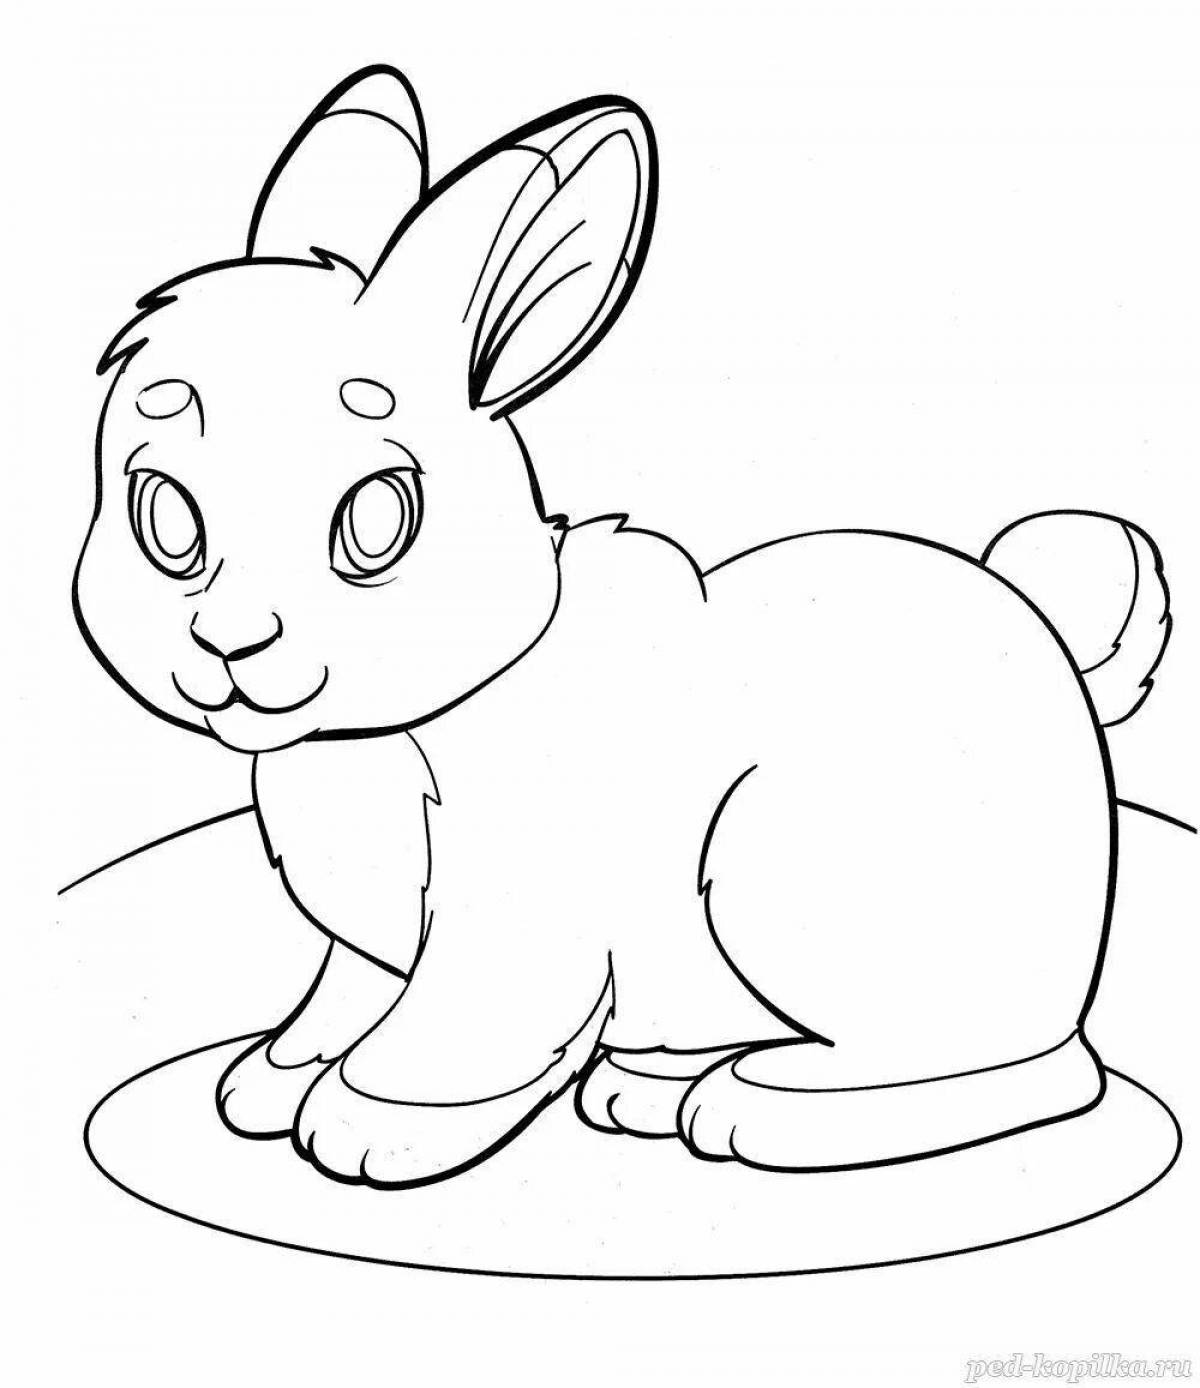 Amazing Bunny Coloring for Toddlers